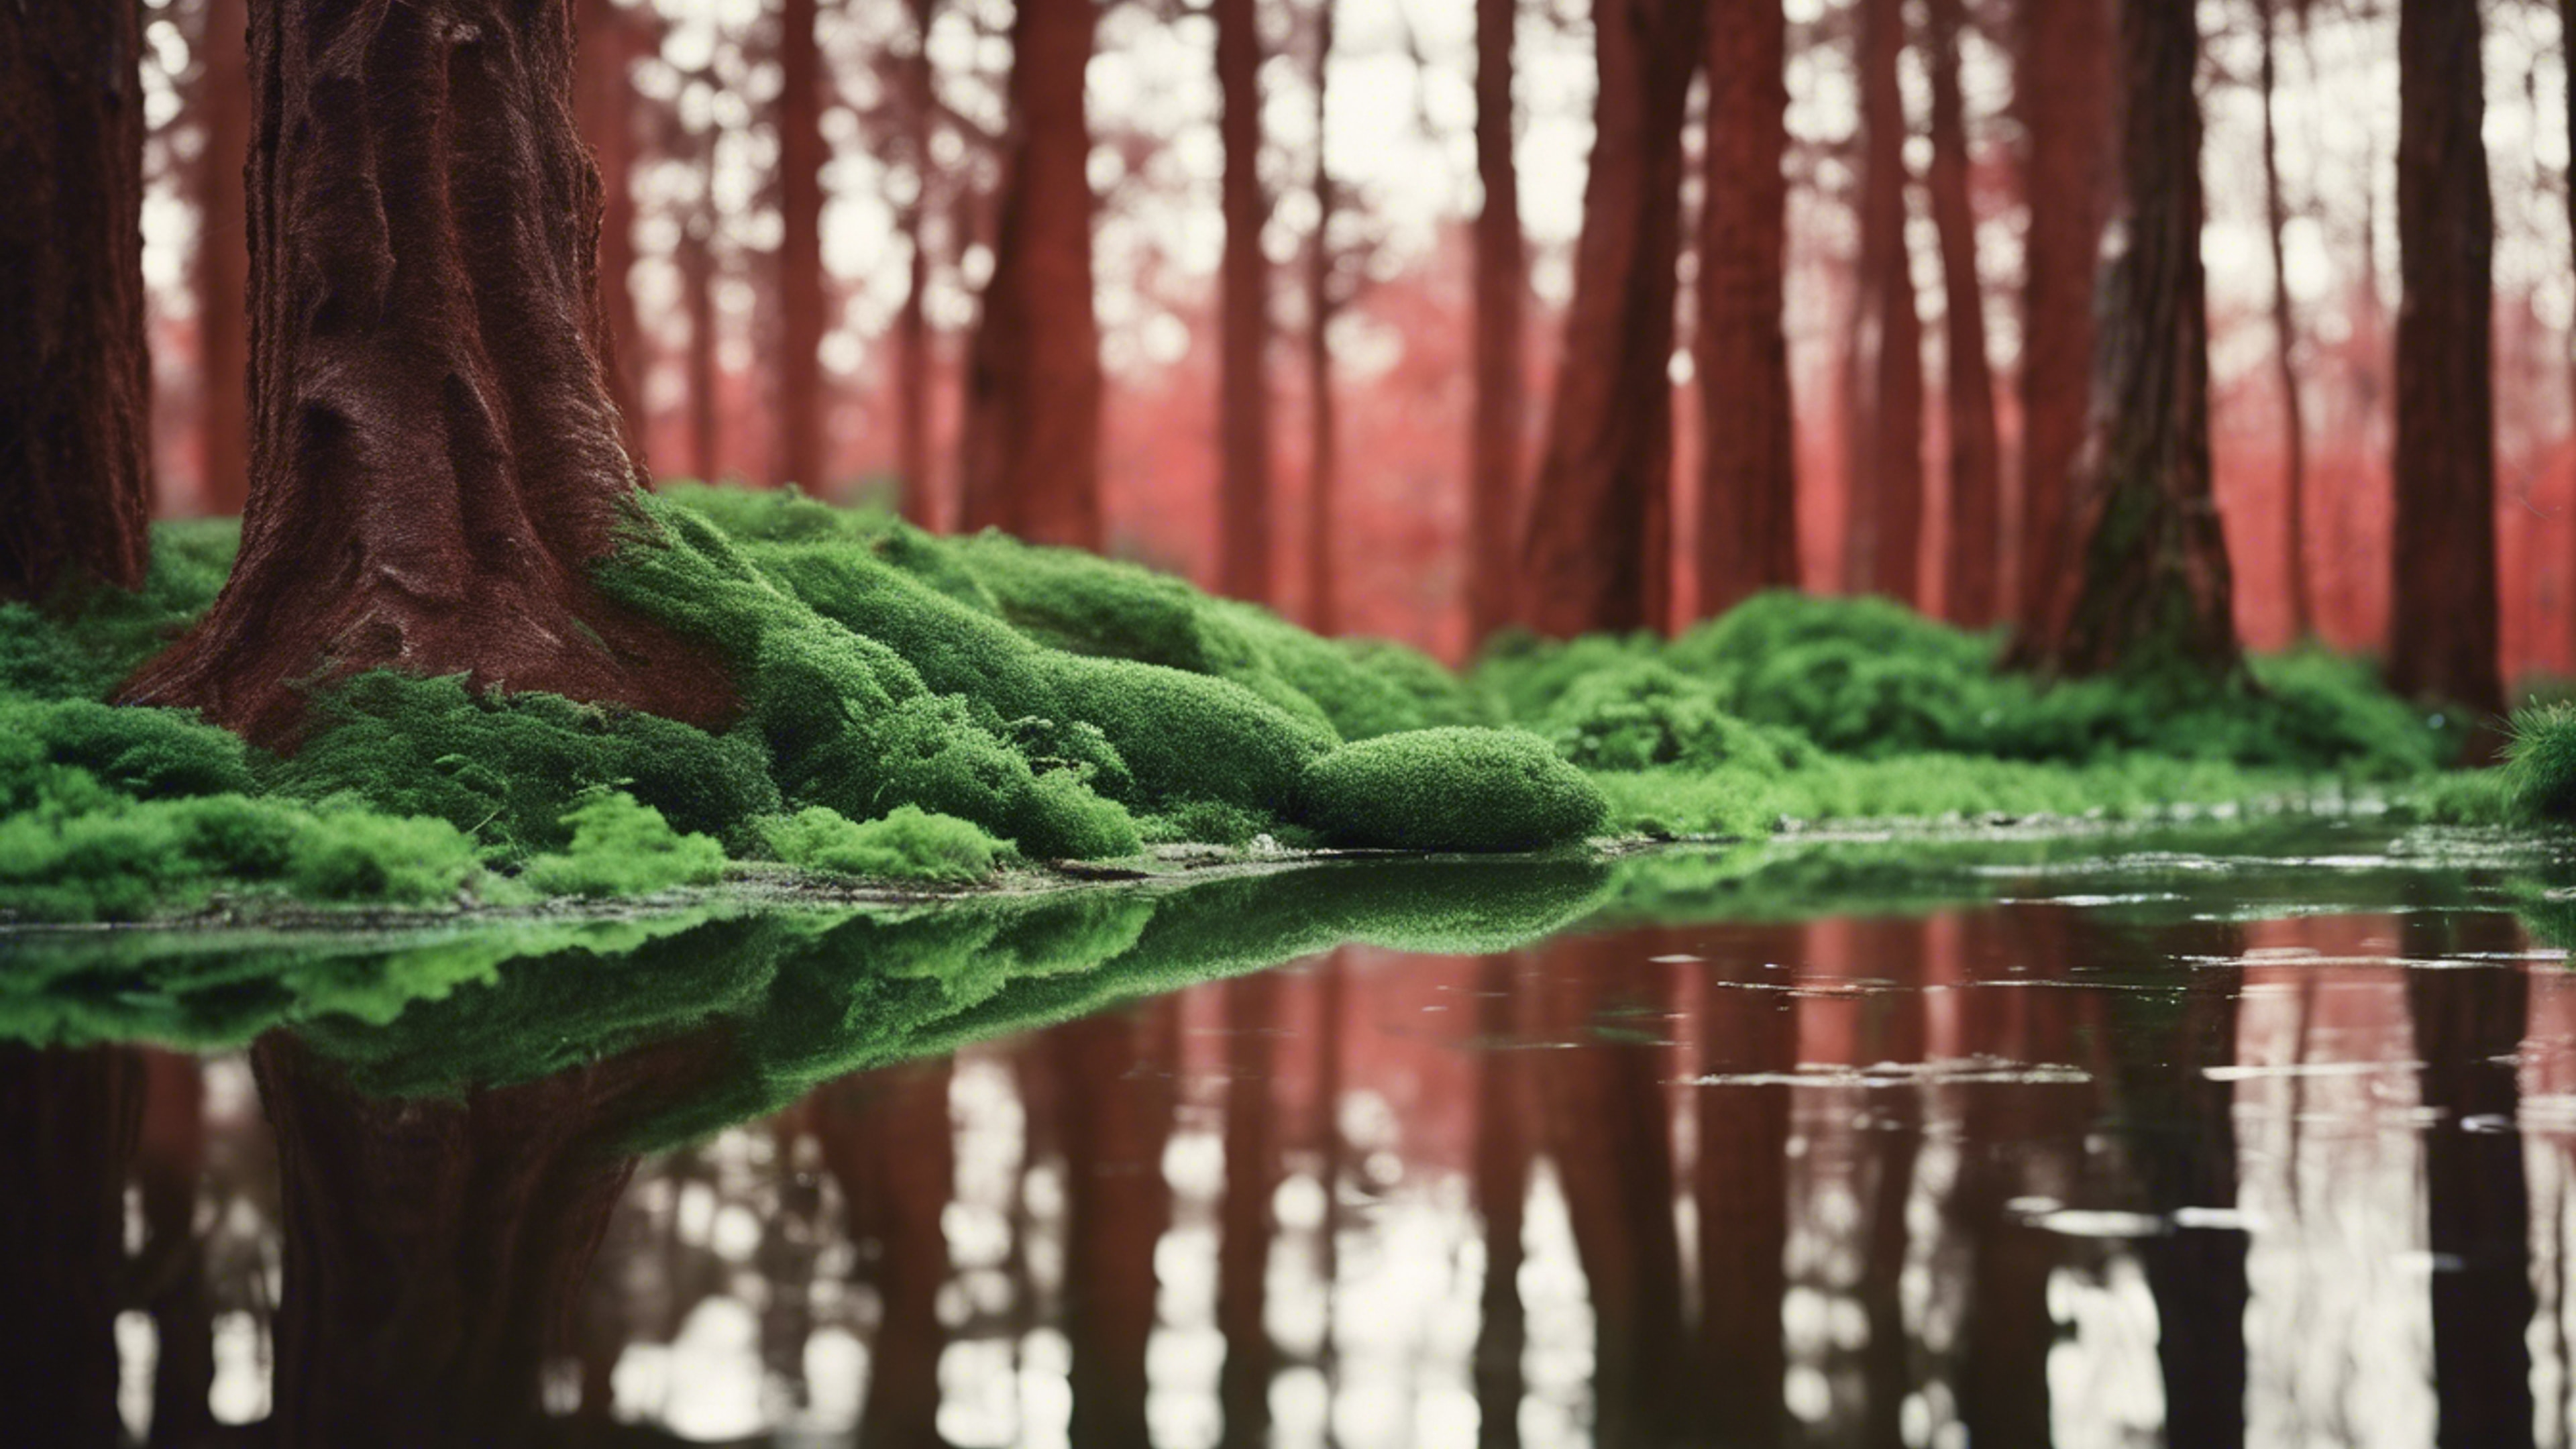 Lush, green forest reflections on a shiny, red leather surface. 墙纸[6f4e1618f75b40719461]